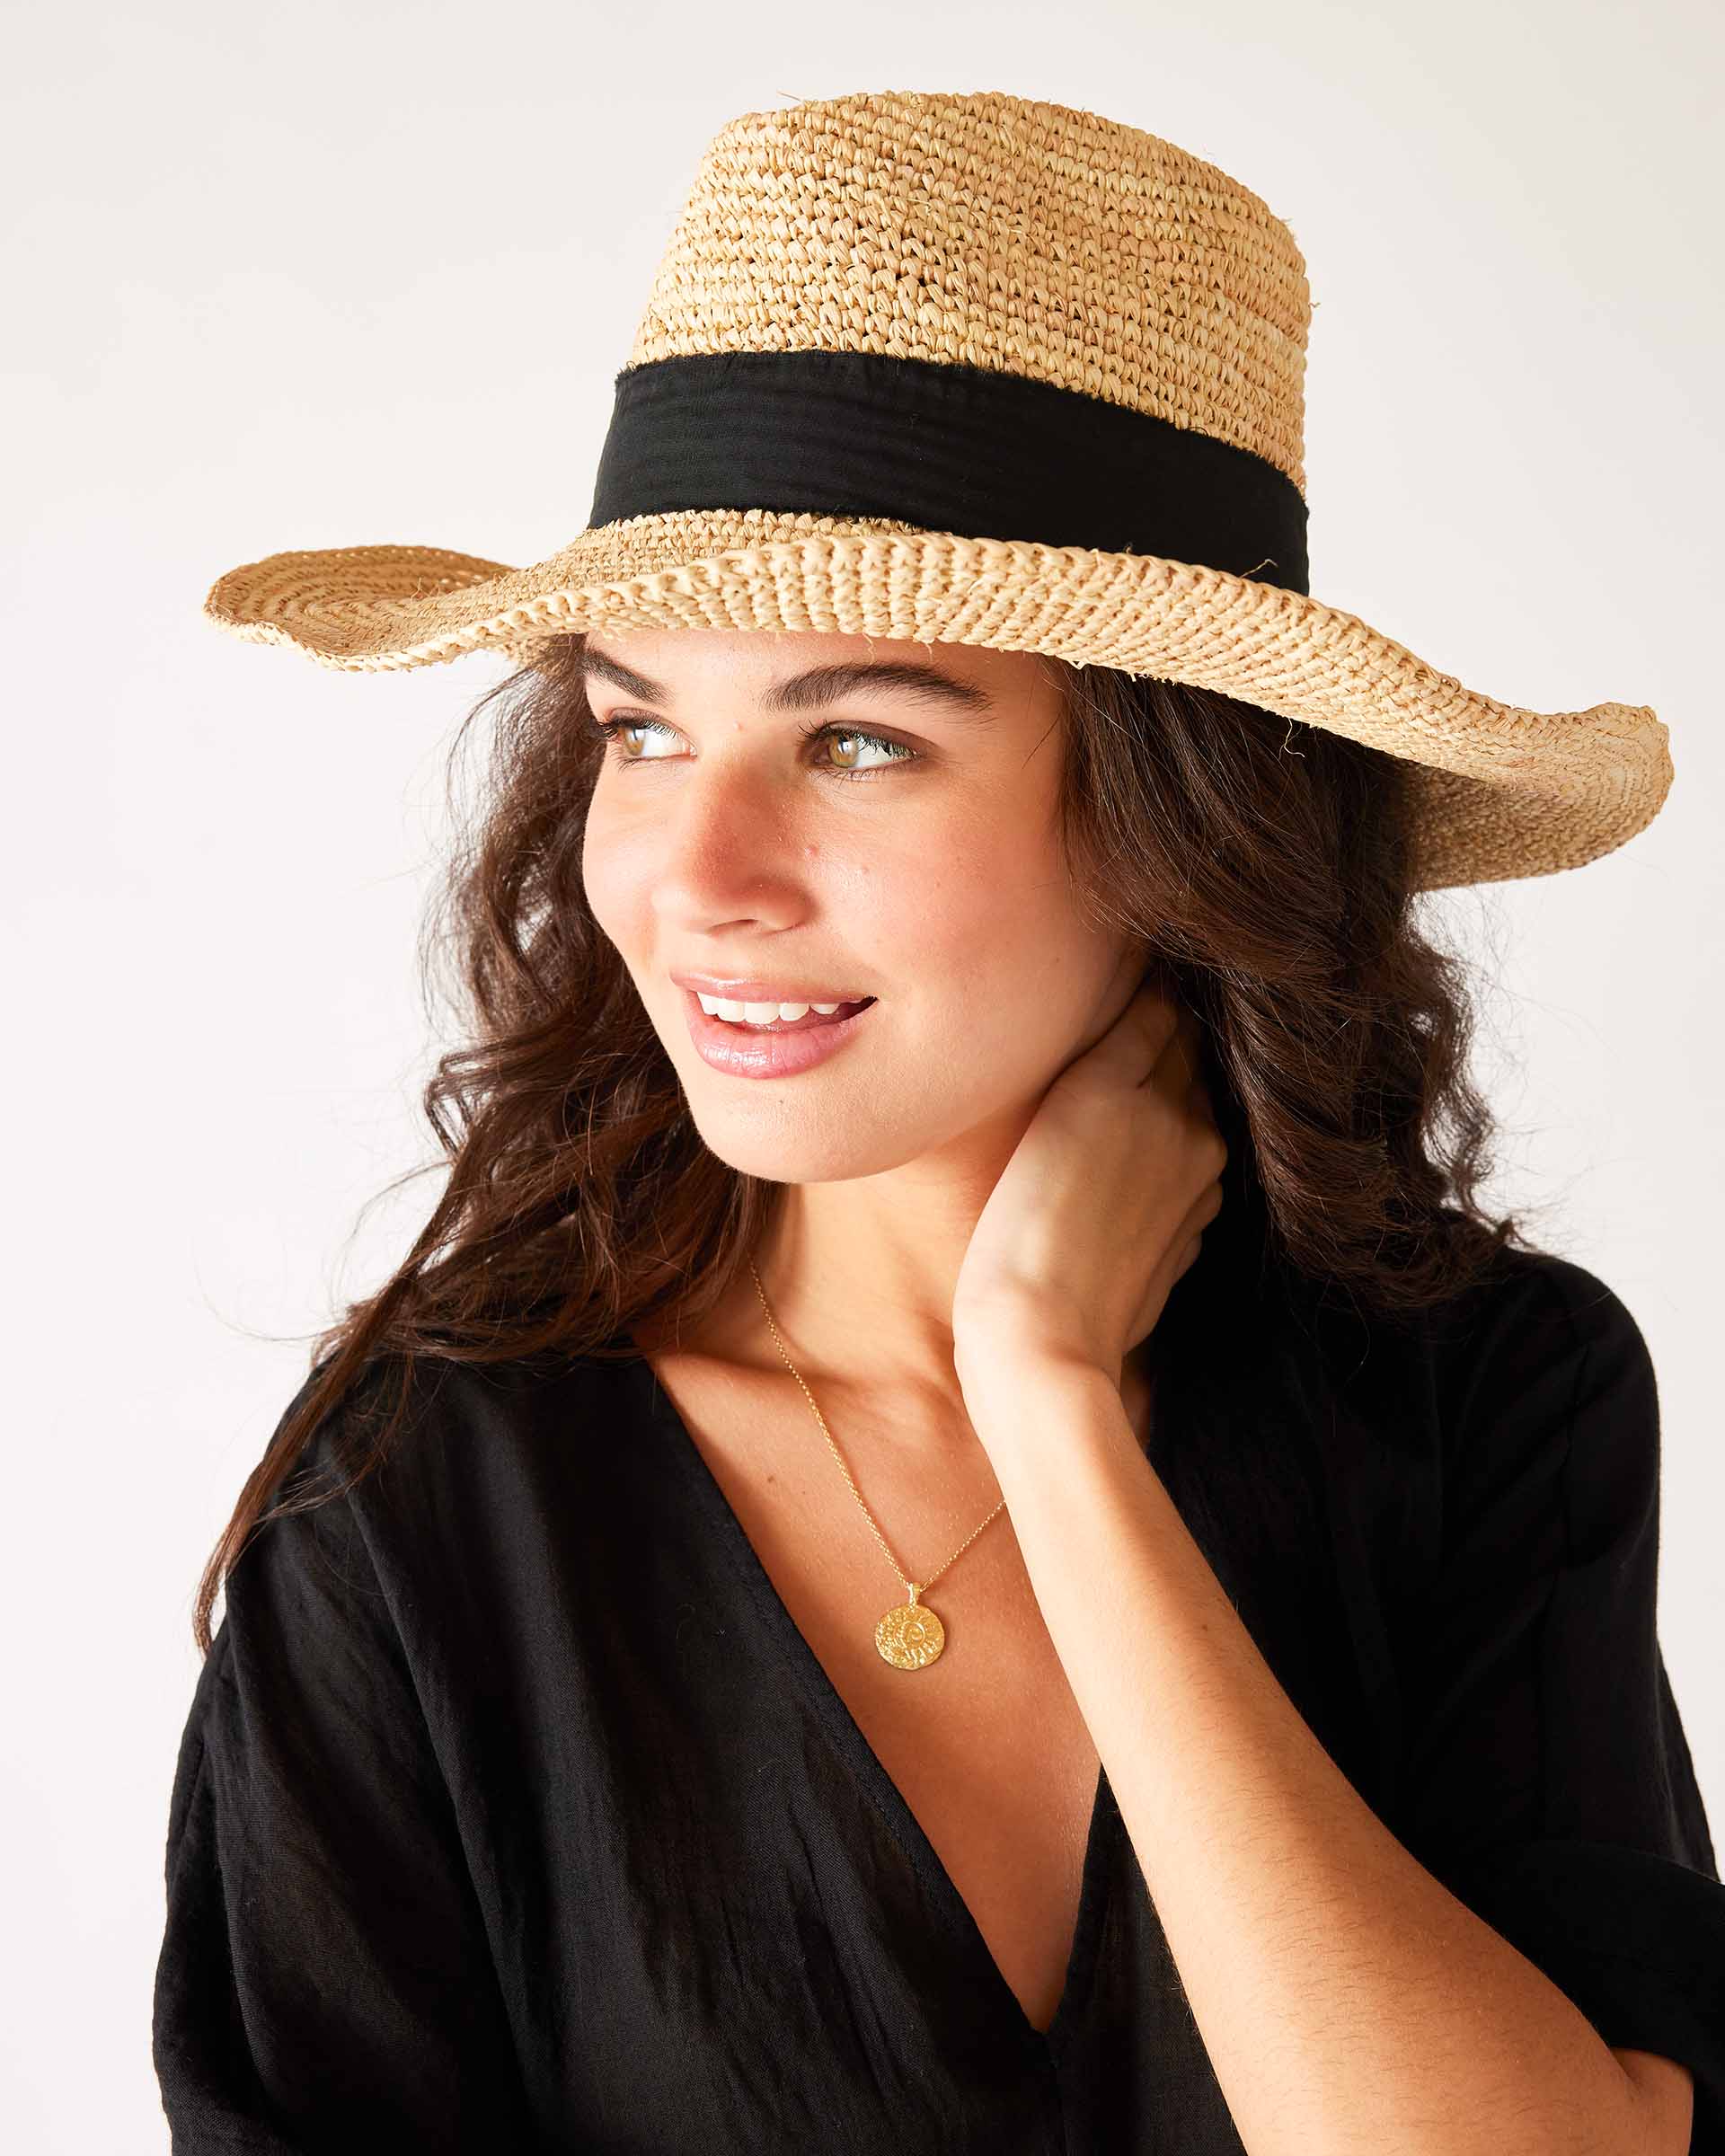 woman looking sideways in a black dress with seagrove straw hat on